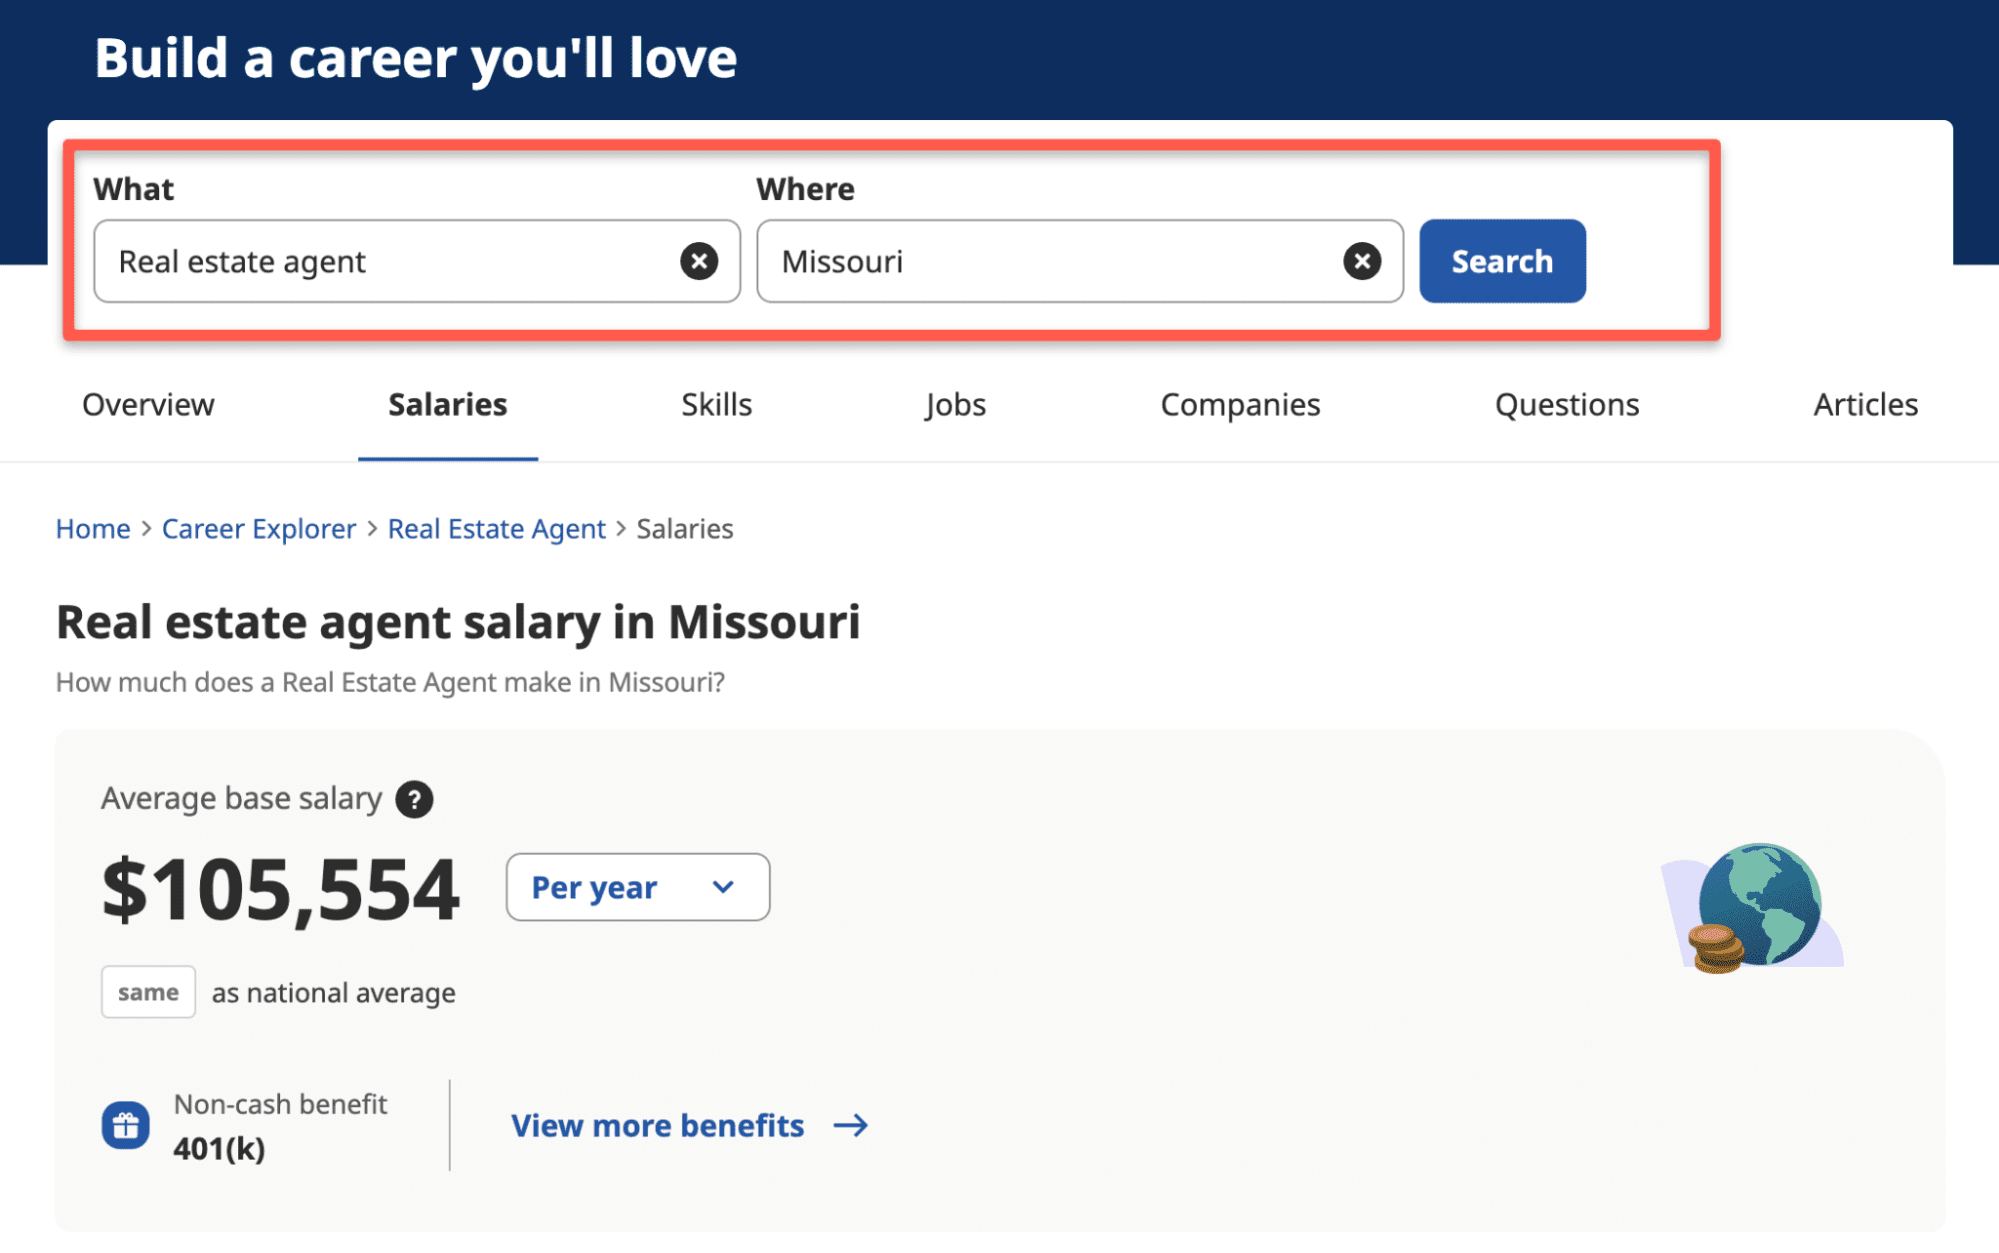 Salary information for real estate agents in Missouri.